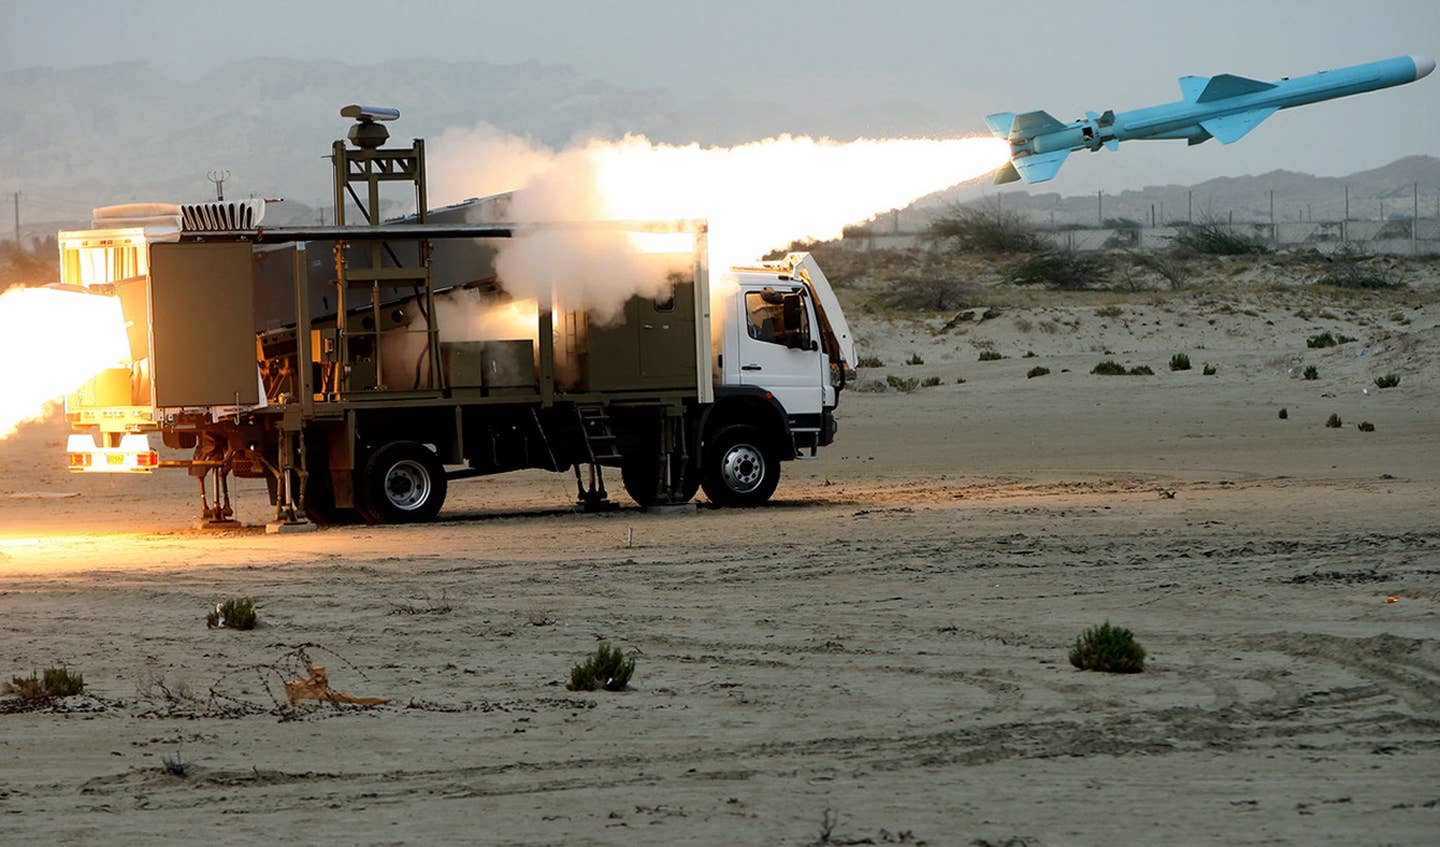 An Iranian Noor missile is launched during war games on April 25, 2010, in southern Iran, near the Strait of Hormuz. <em>MEHDI MARIZAD/AFP via Getty Images</em>